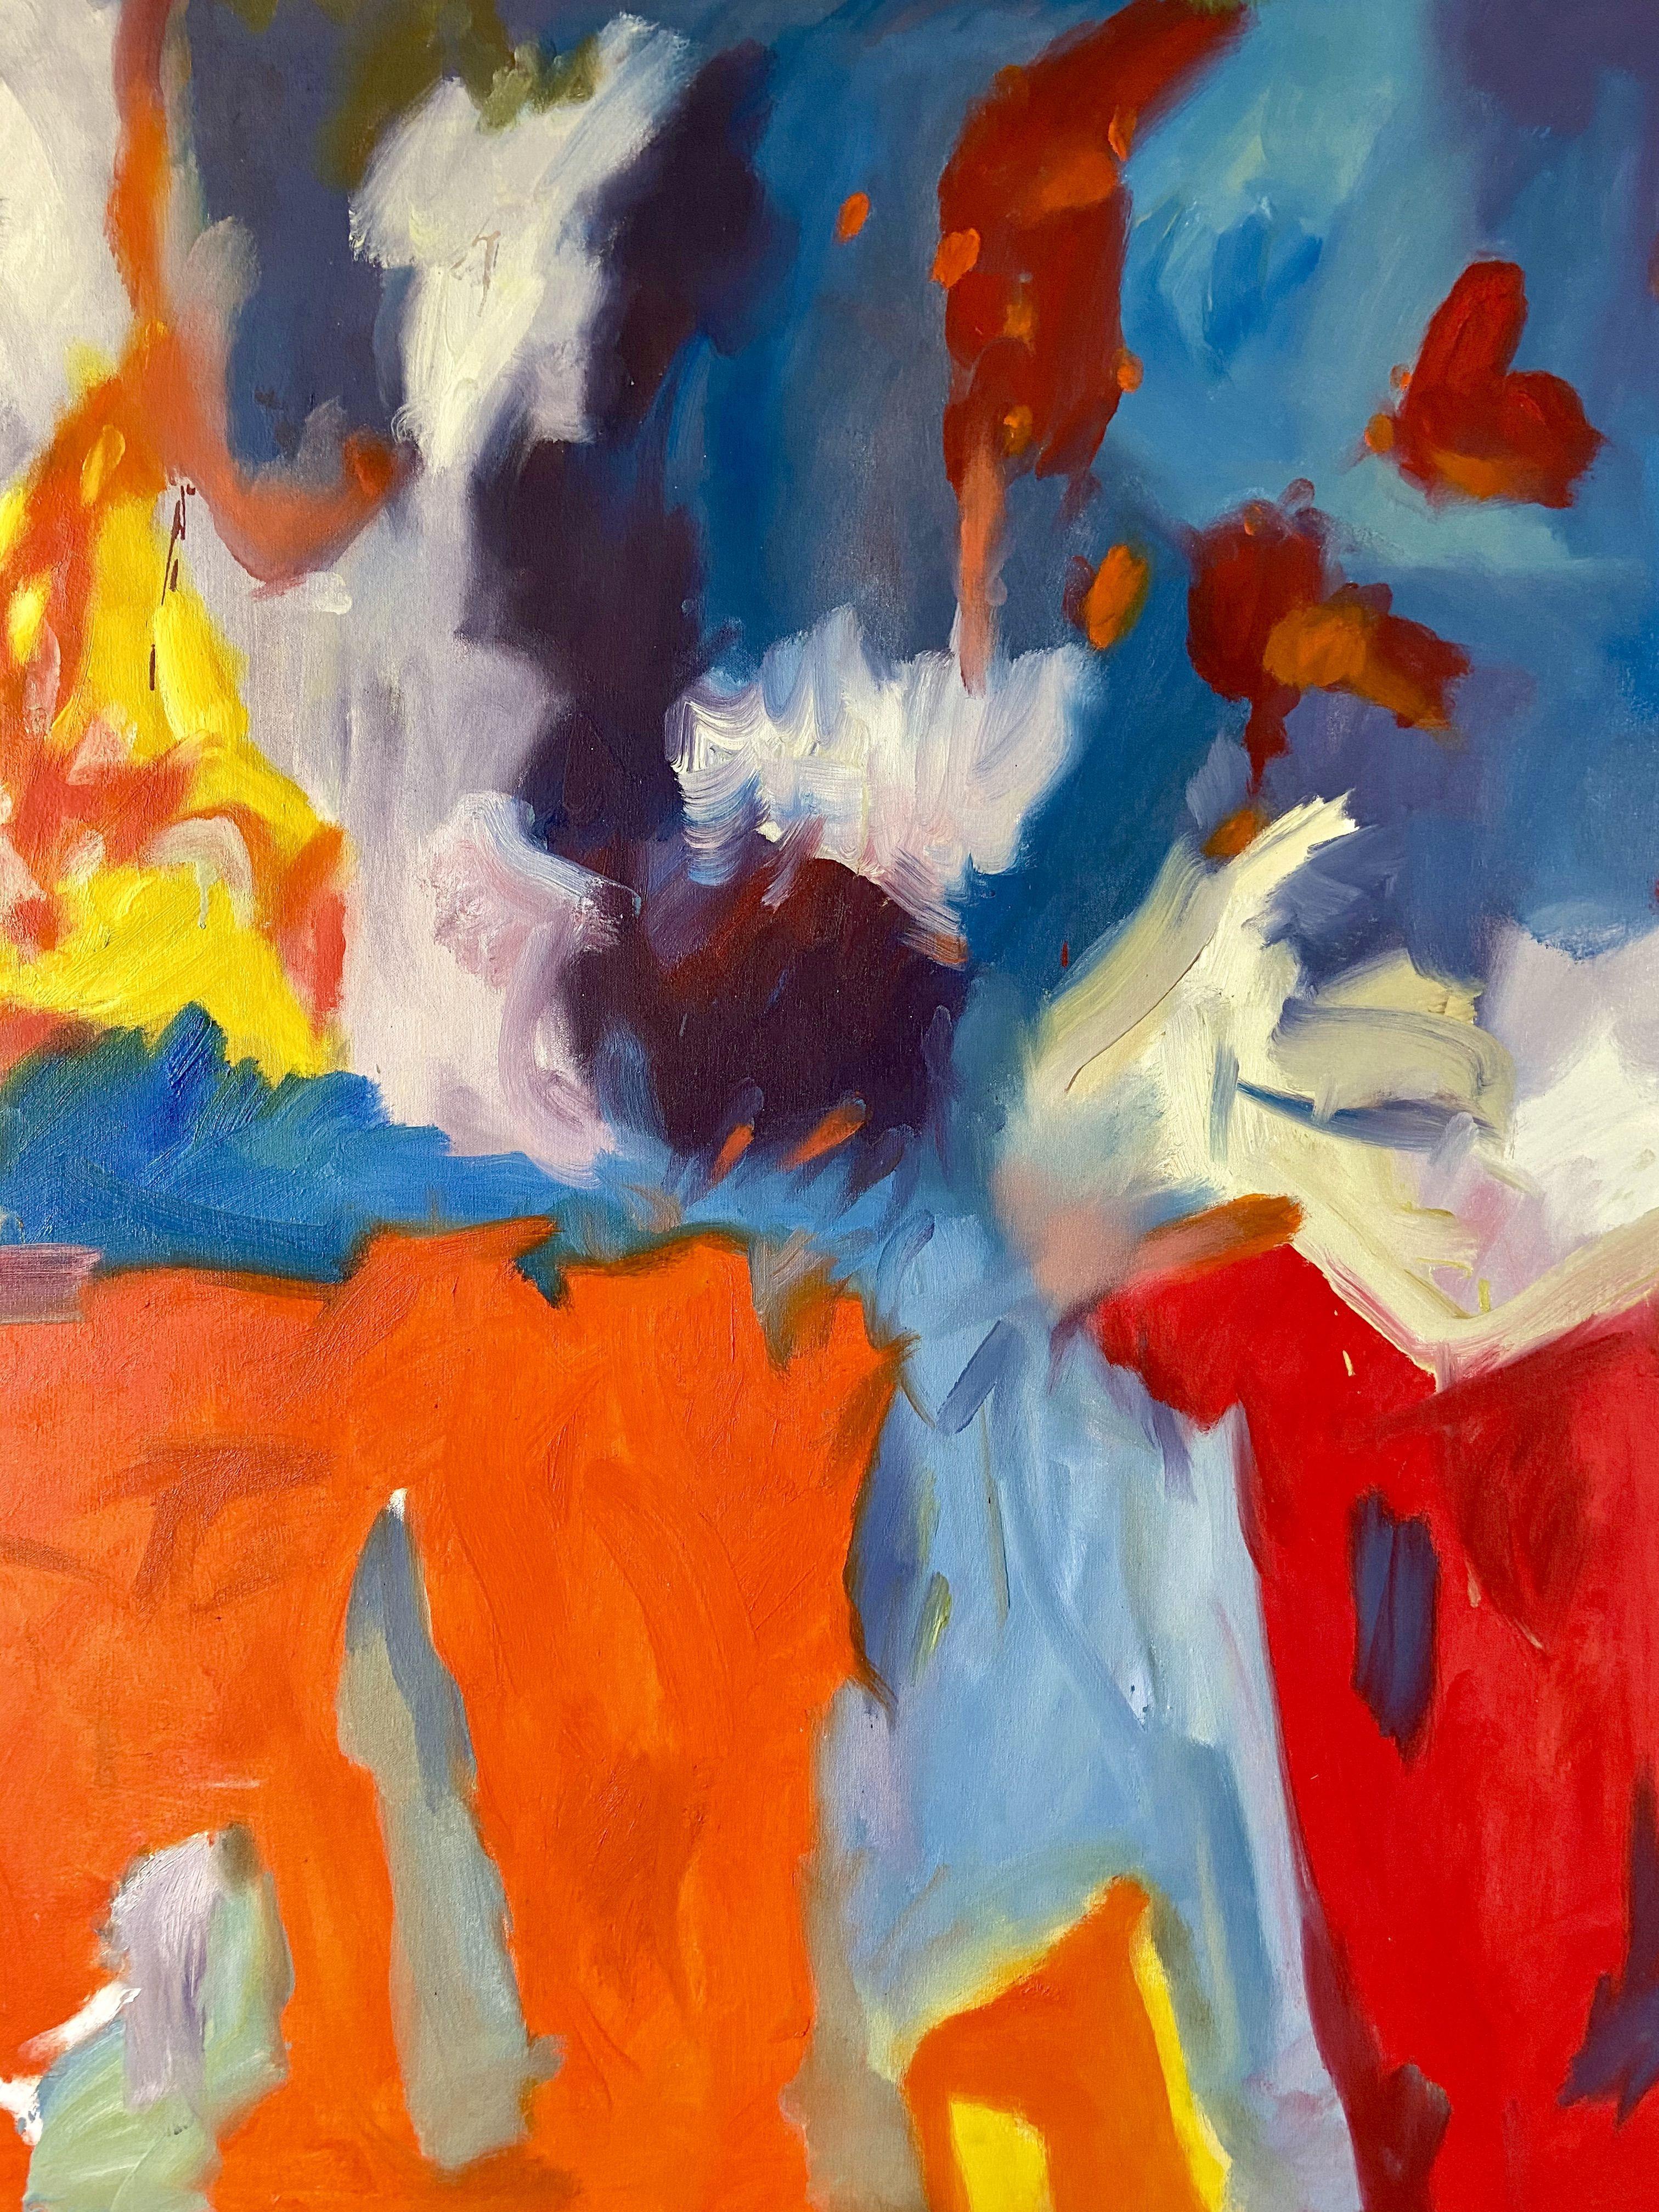 My abstract paintings are all about creating excitement for the viewer through concentrated exploration. Each painting is inspired by nature, travels, or imagination and created to embody immediate impact and lasting power. It is about creating a